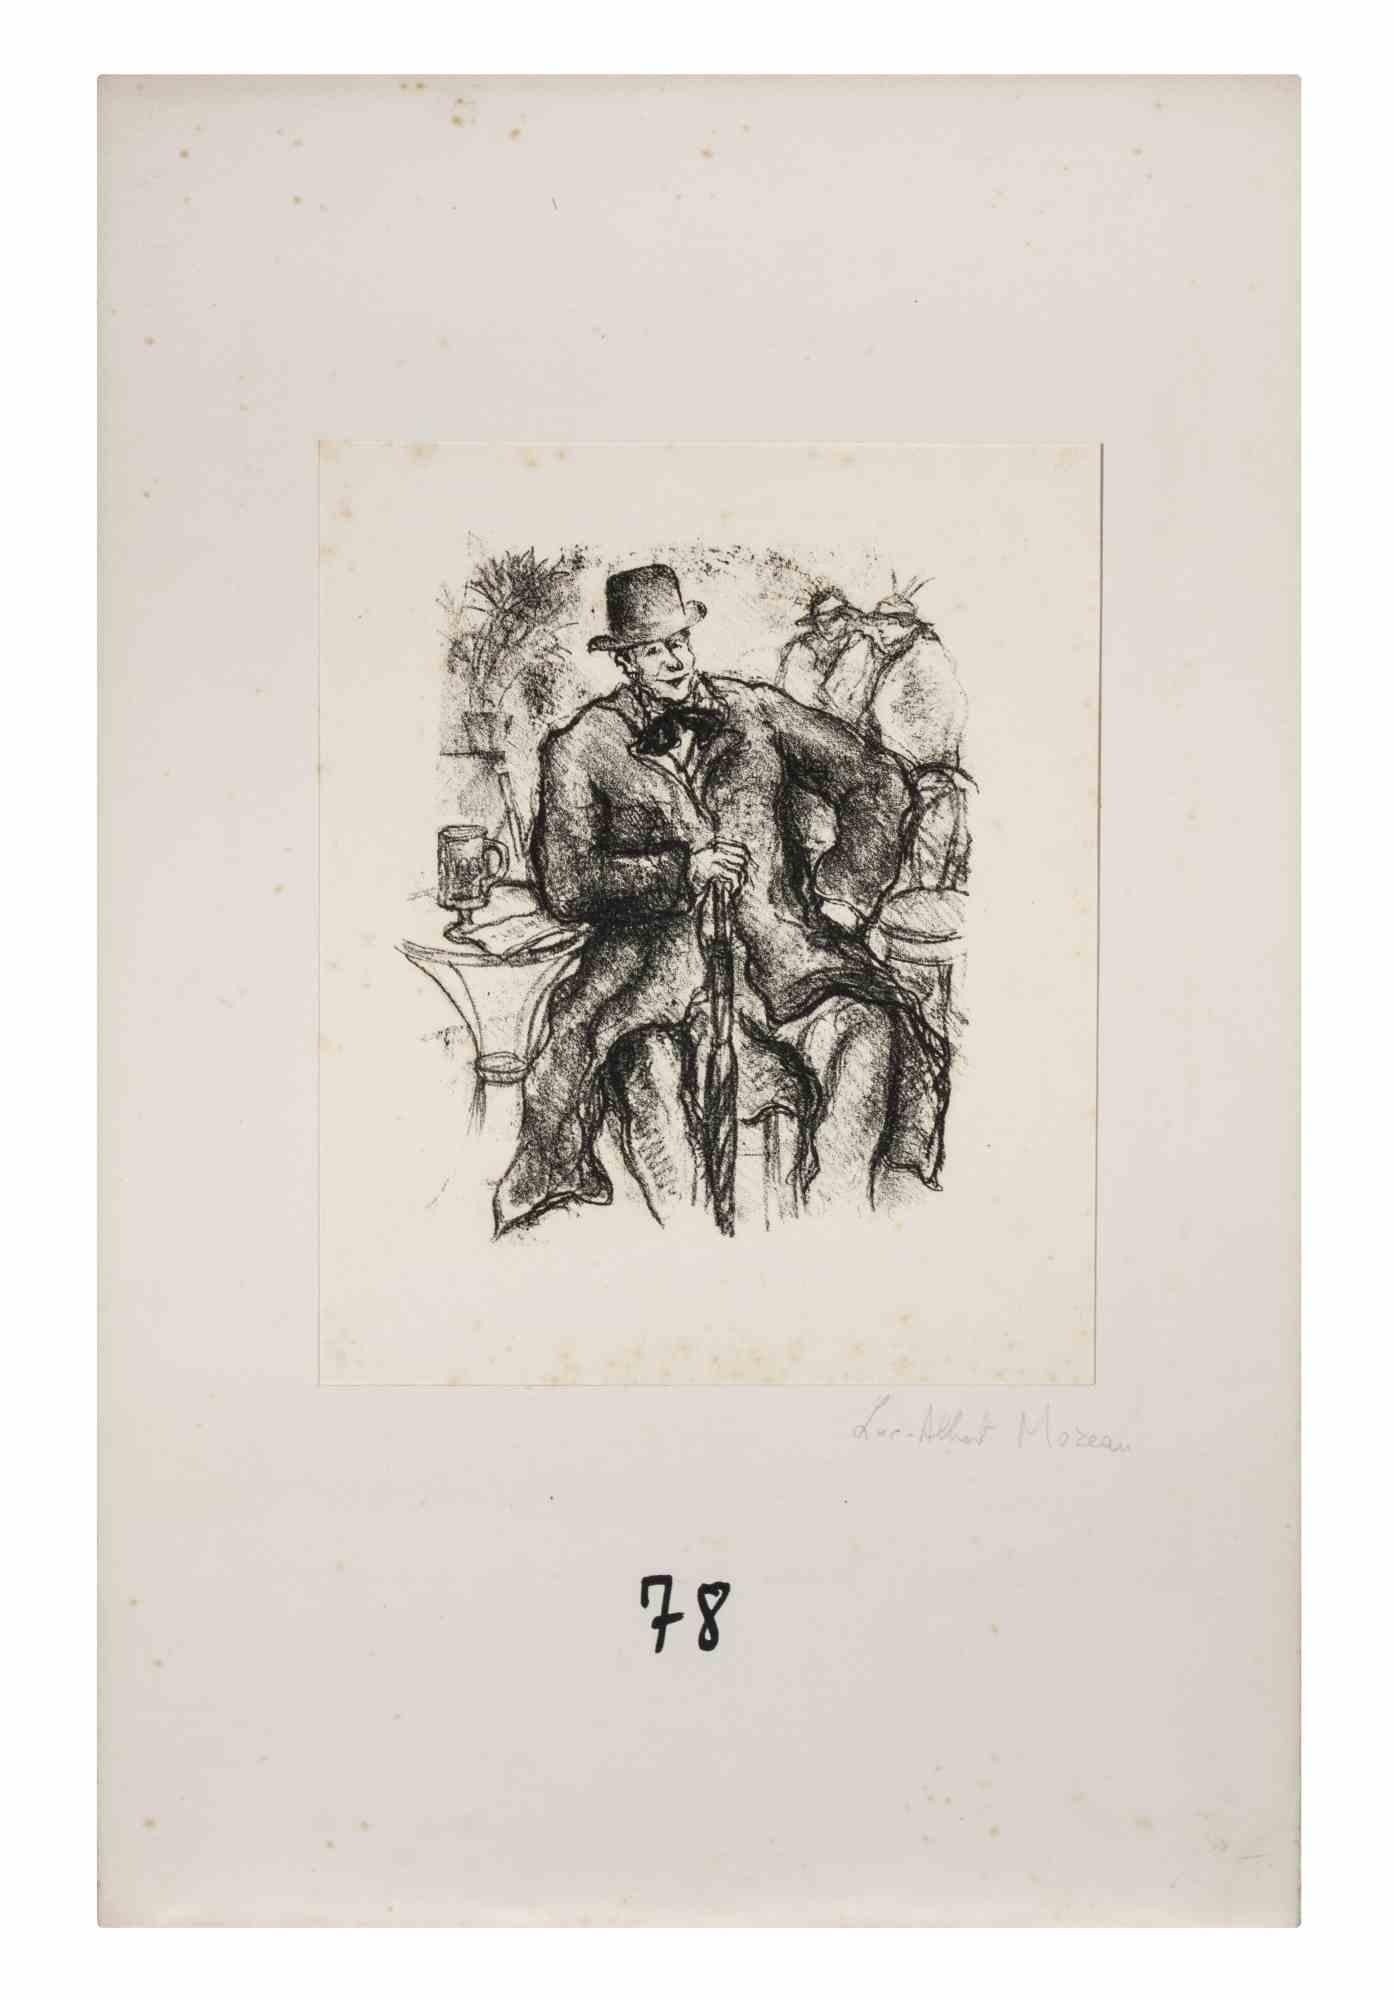 Elegant Man is a Lithograph on ivory-colored paper realized by Luc Albert Moreau.

The artwork is in good condition, included a white cardboard passpartout (50x32.5 cm).

Luc-Albert Moreau (1882-1948) is a French painter, engraver, lithographer, and